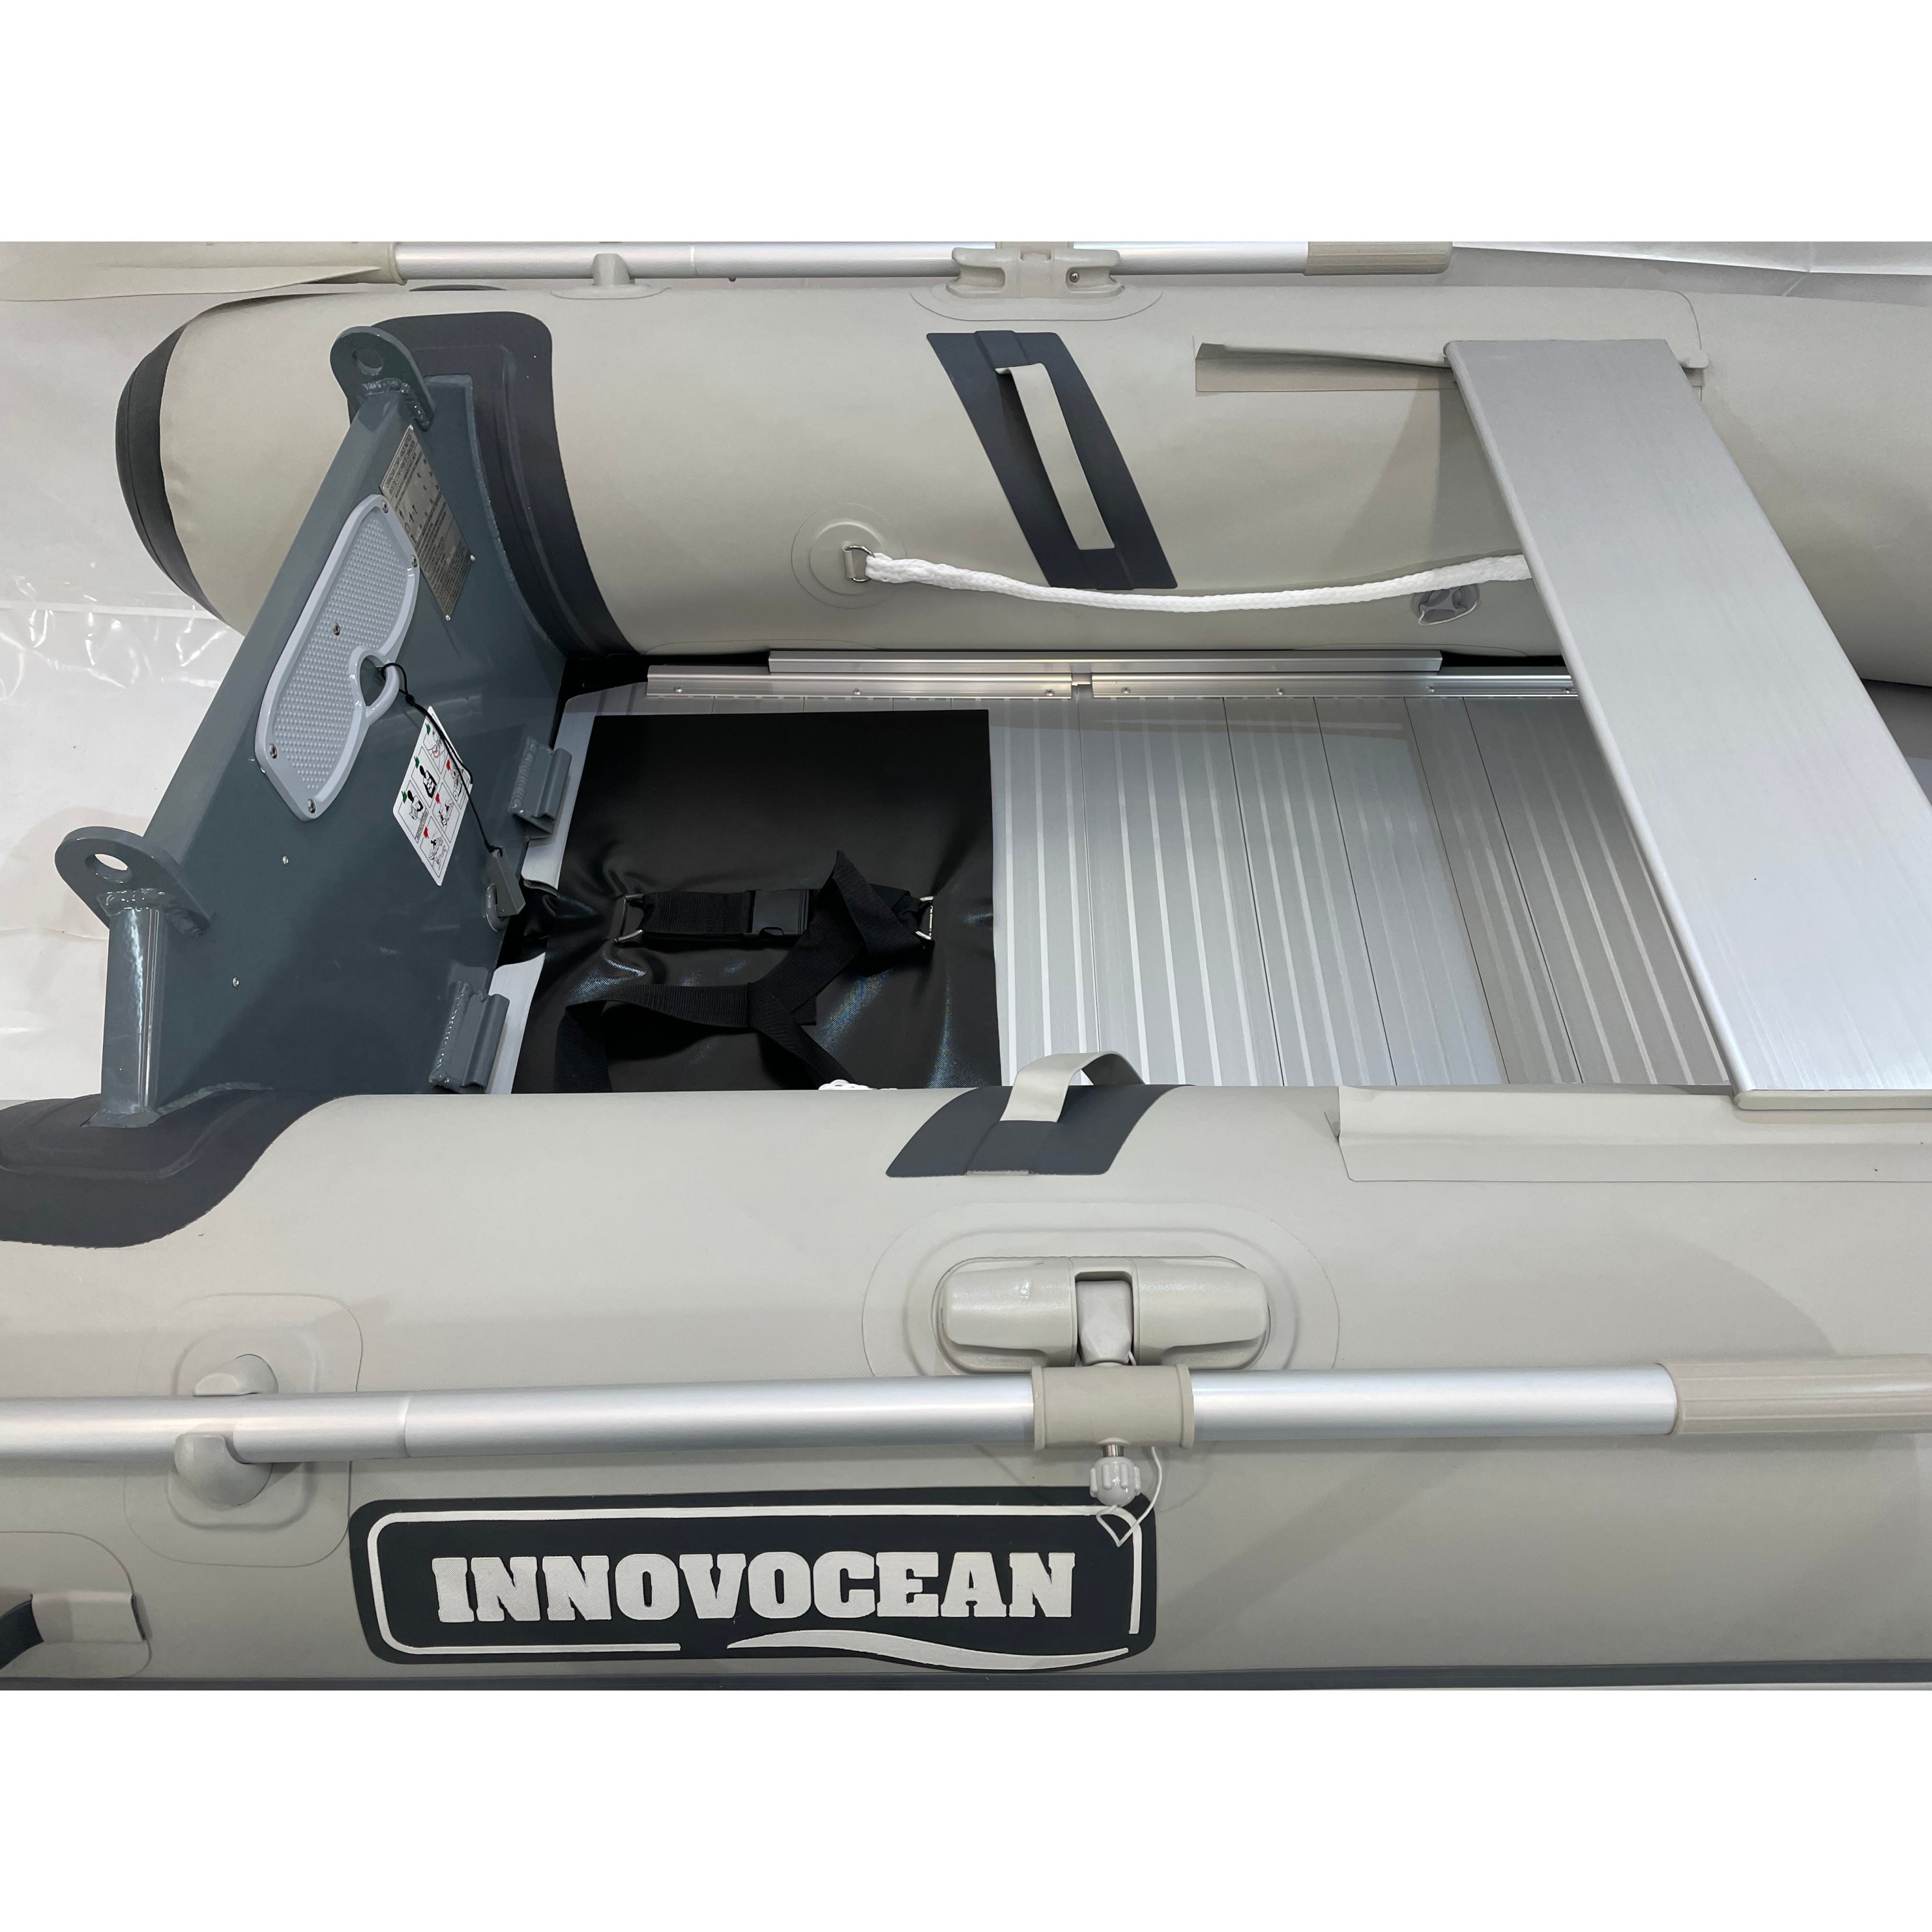 OS240A 8ft Advanced Inflatable Boat